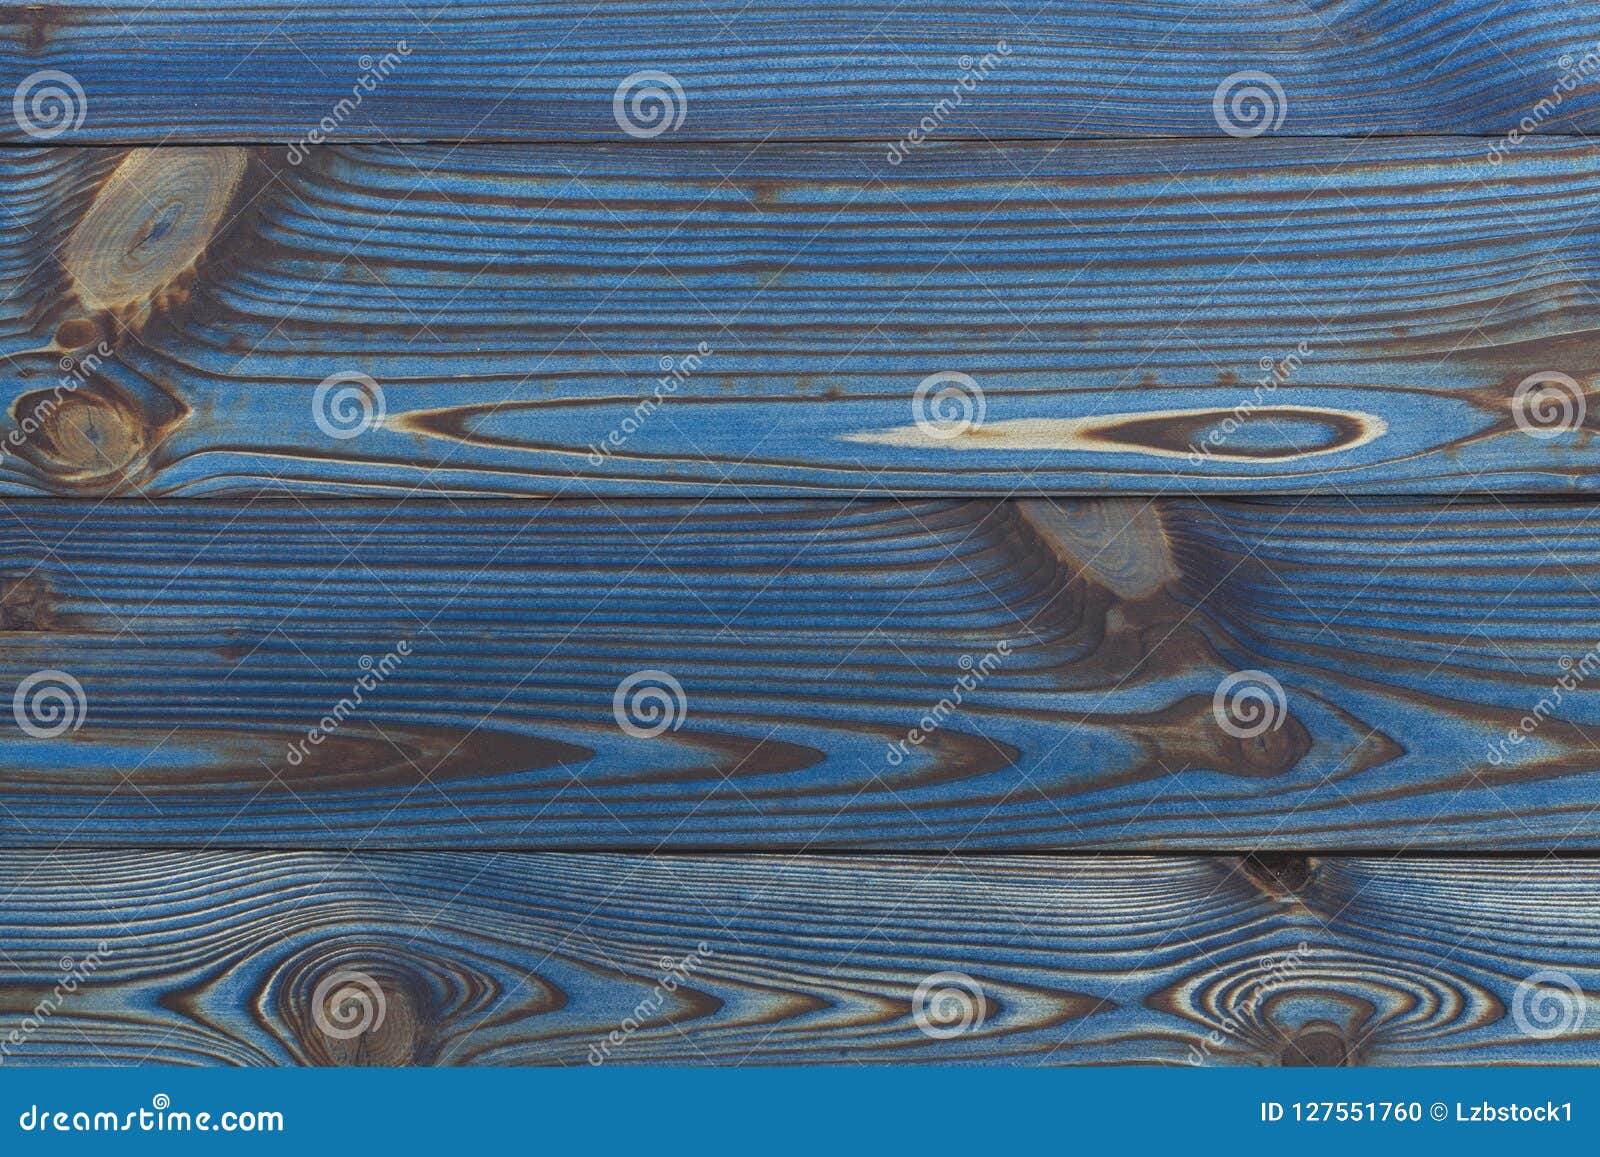 https://thumbs.dreamstime.com/z/old-blue-wood-background-rustic-wooden-surface-copy-space-vintage-painted-horizontal-planks-wall-textured-faded-natural-board-127551760.jpg